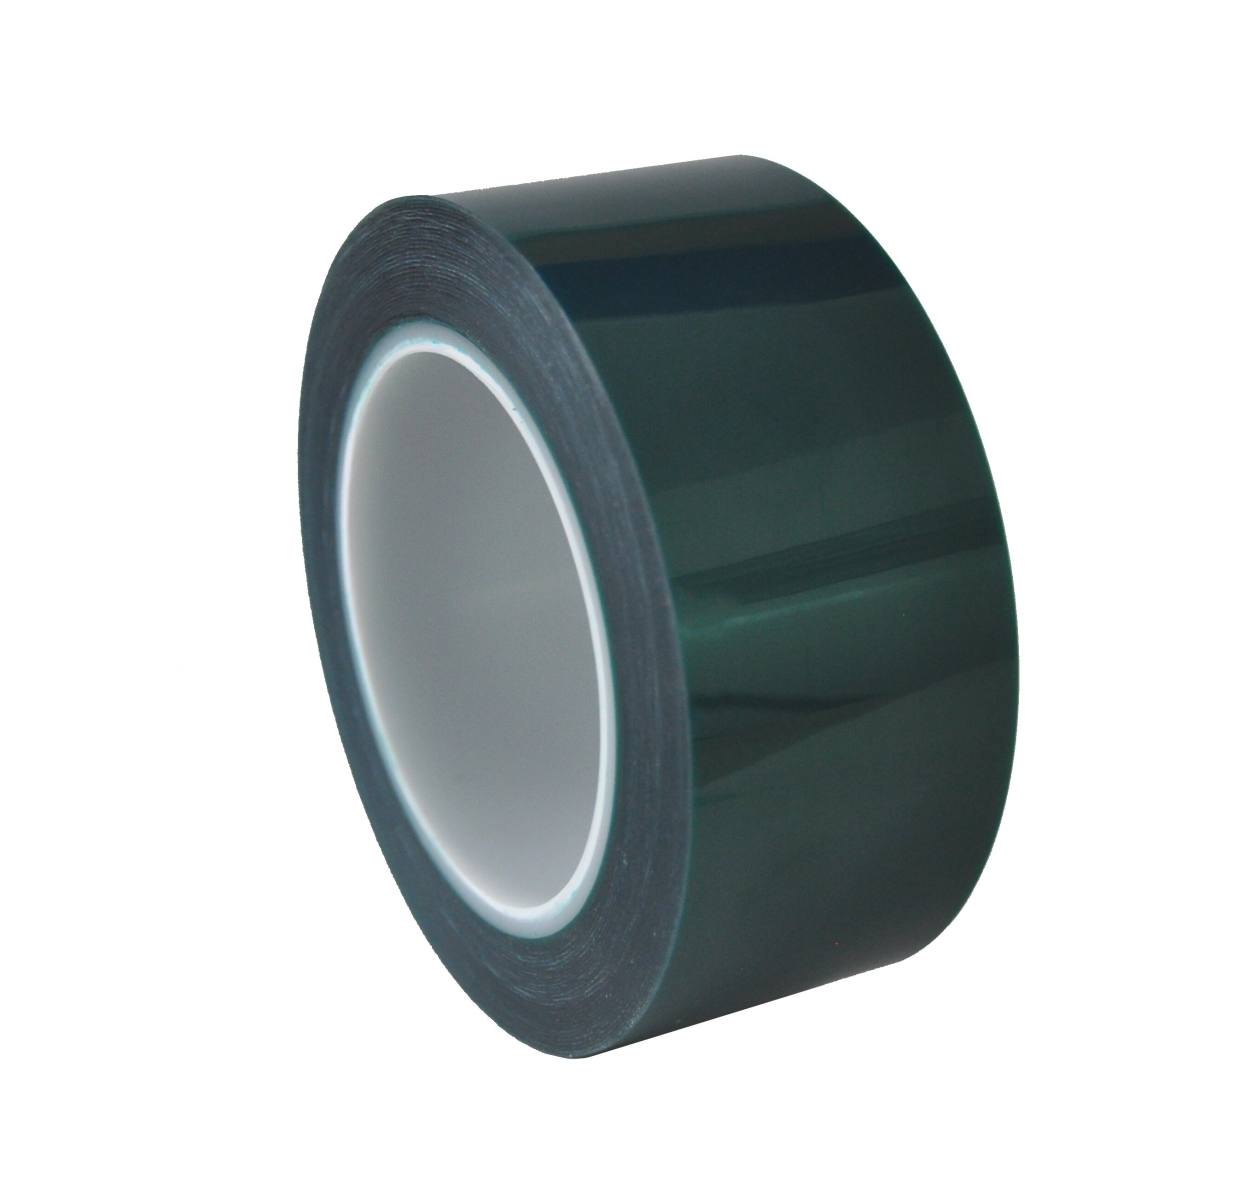 S-K-S 208G polyester adhesive tape, 9mmx66m, green